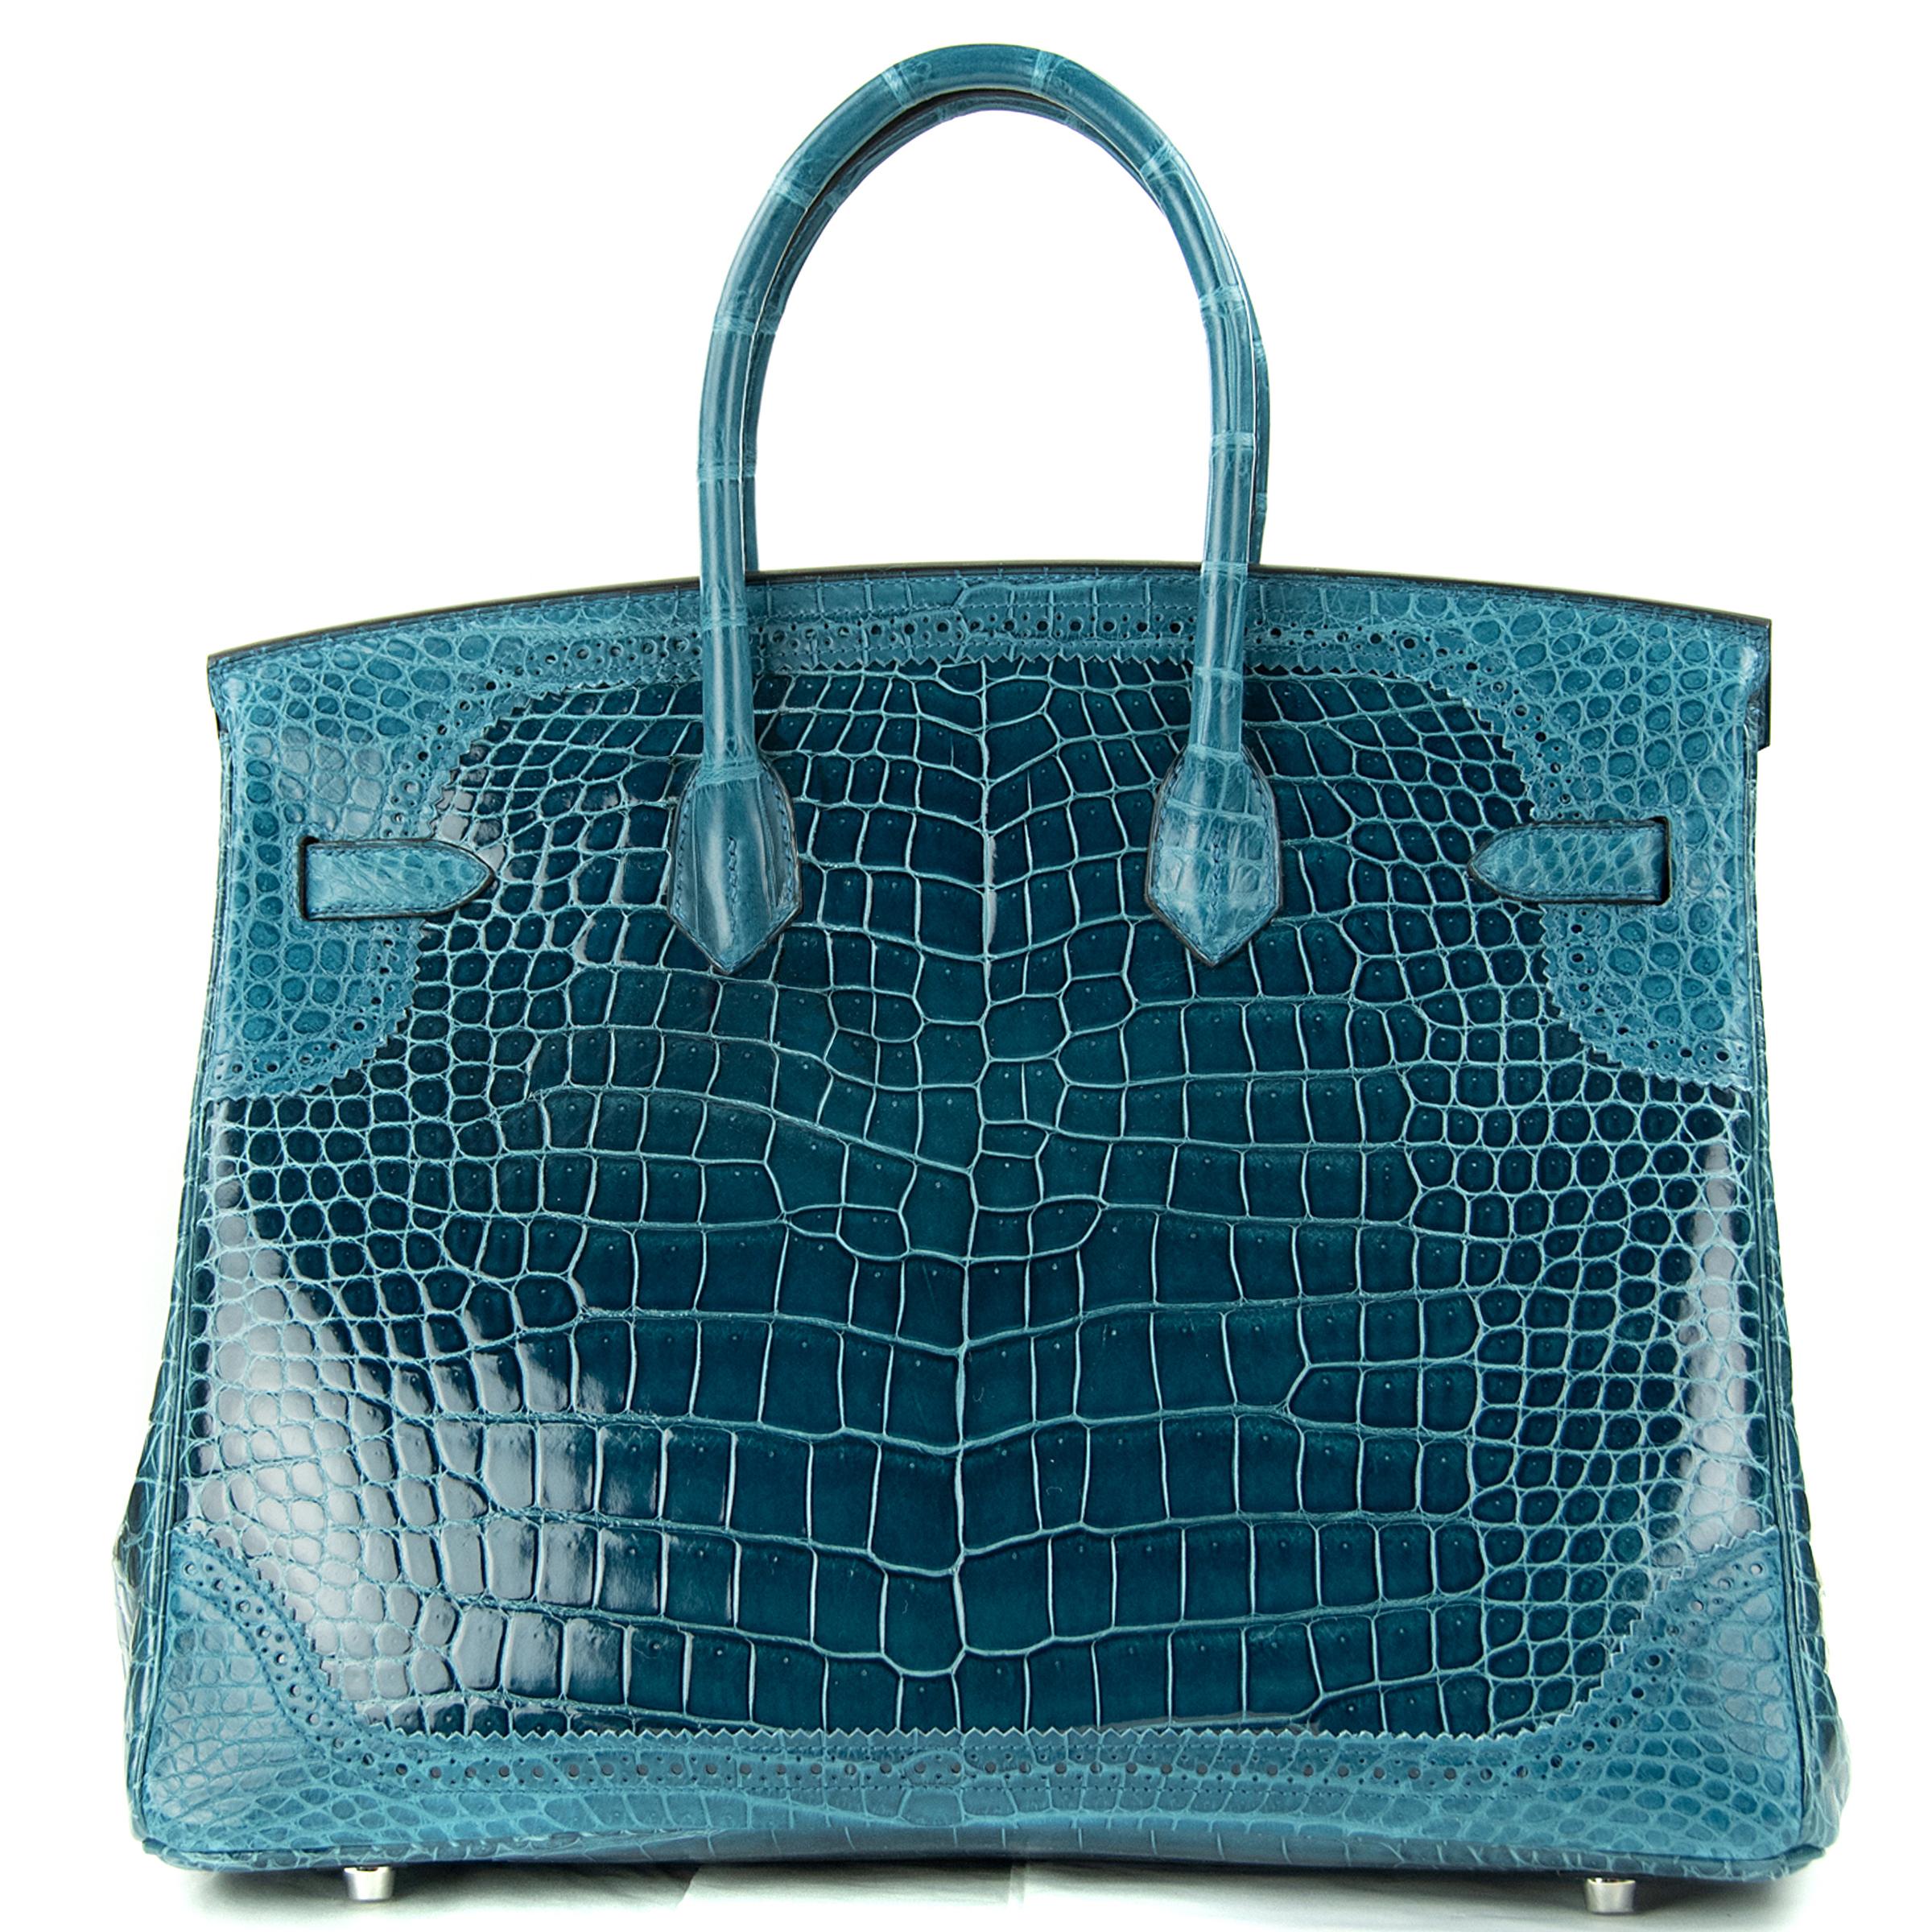 Limited Edition Hermes Birkin Ghillies Bag 35cm Shiny and Matte Bleu Colvert PHW For Sale 4